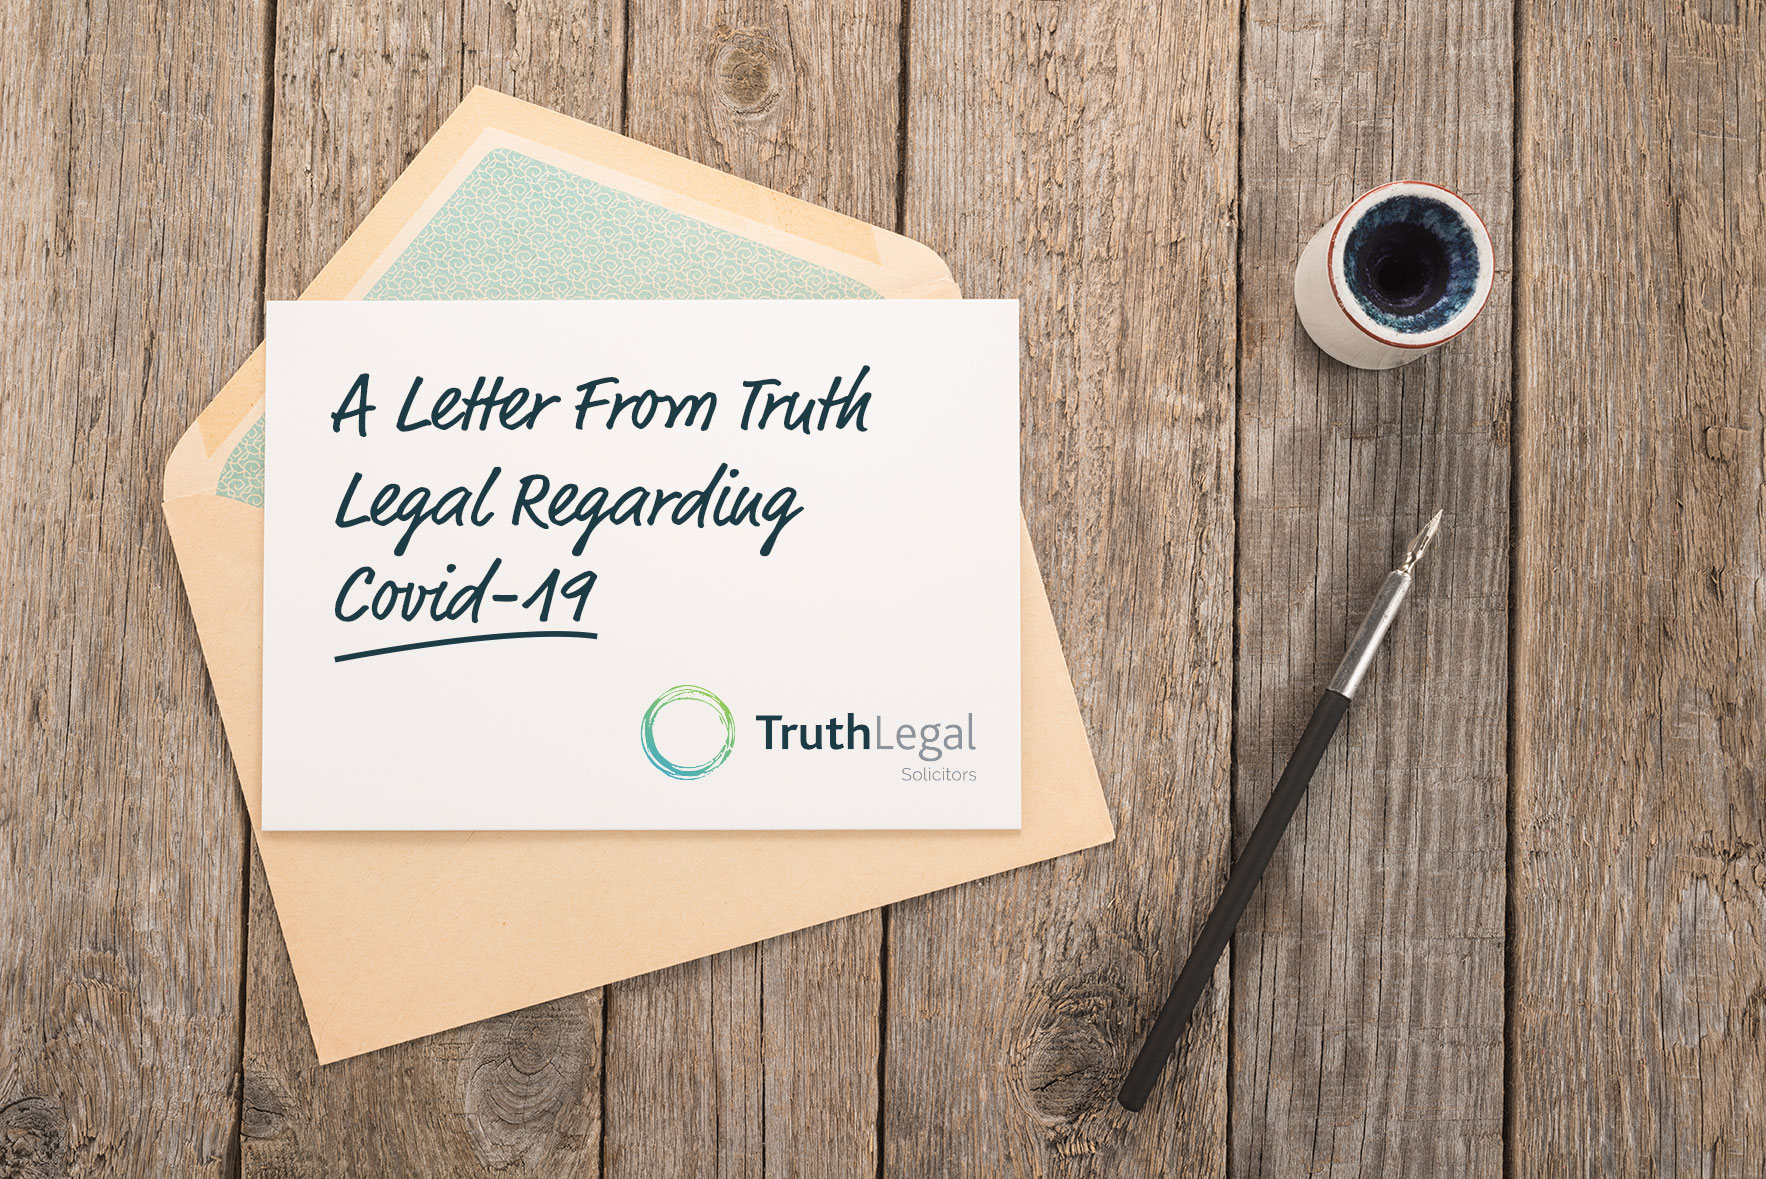 A Letter From Truth Legal Regarding Covid-19